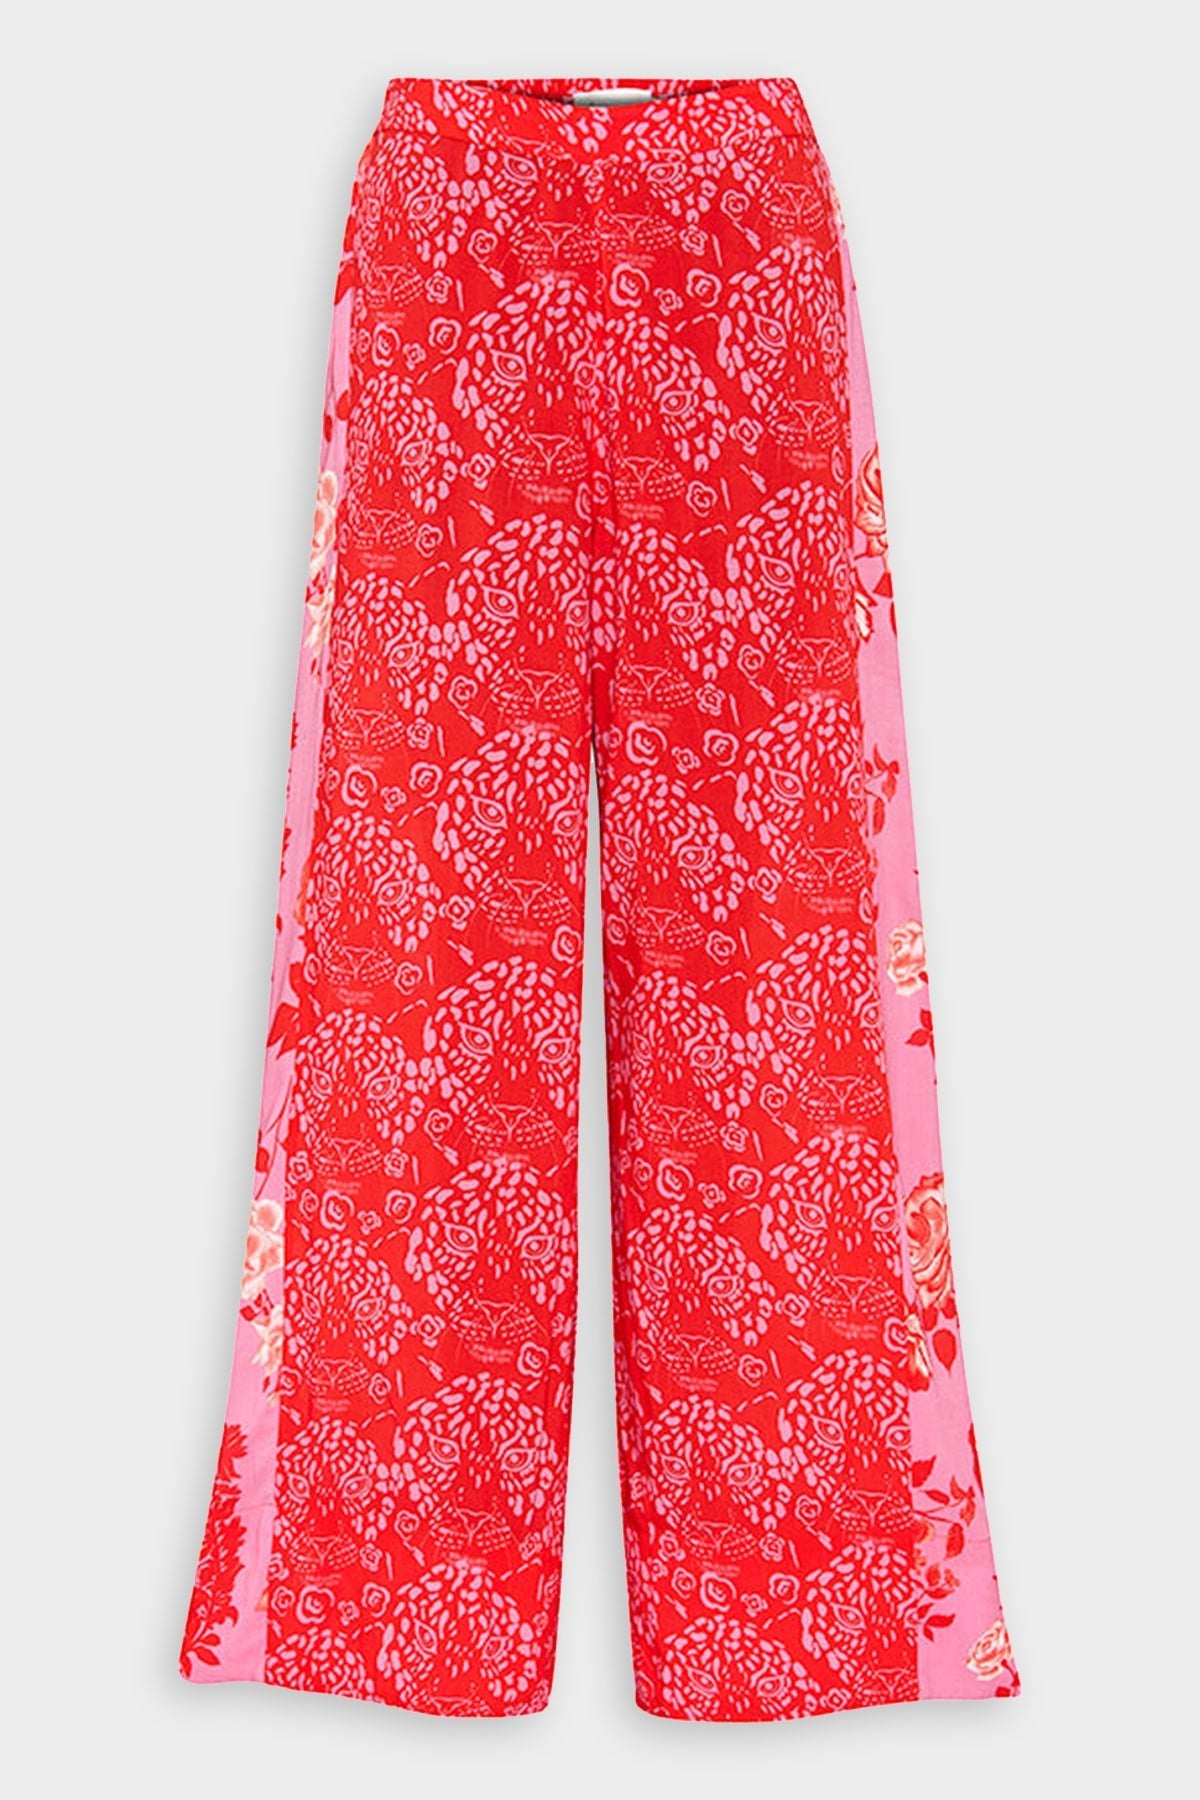 Dual Print Pants in Red Spotted Leopard Face Pink and Red Mono Roses - shop-olivia.com